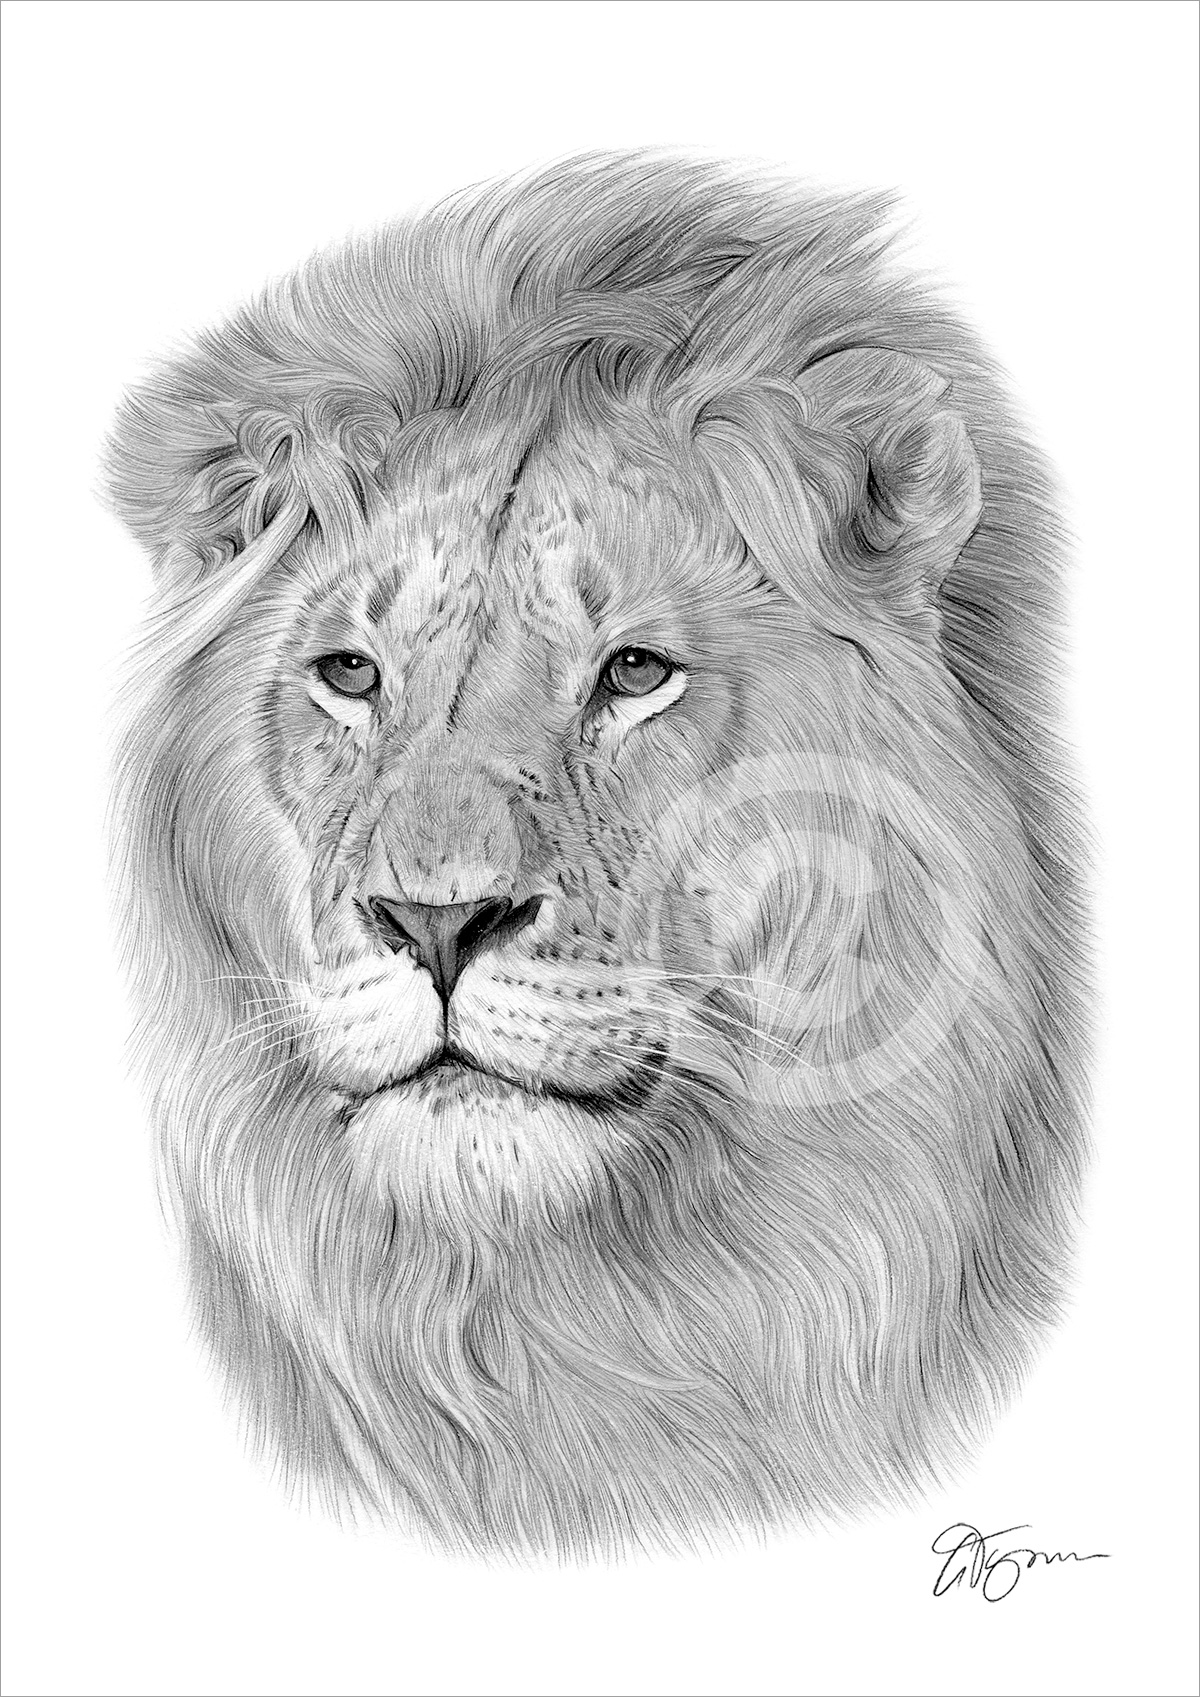 Pencil drawing of an adult lion by artist Gary Tymon